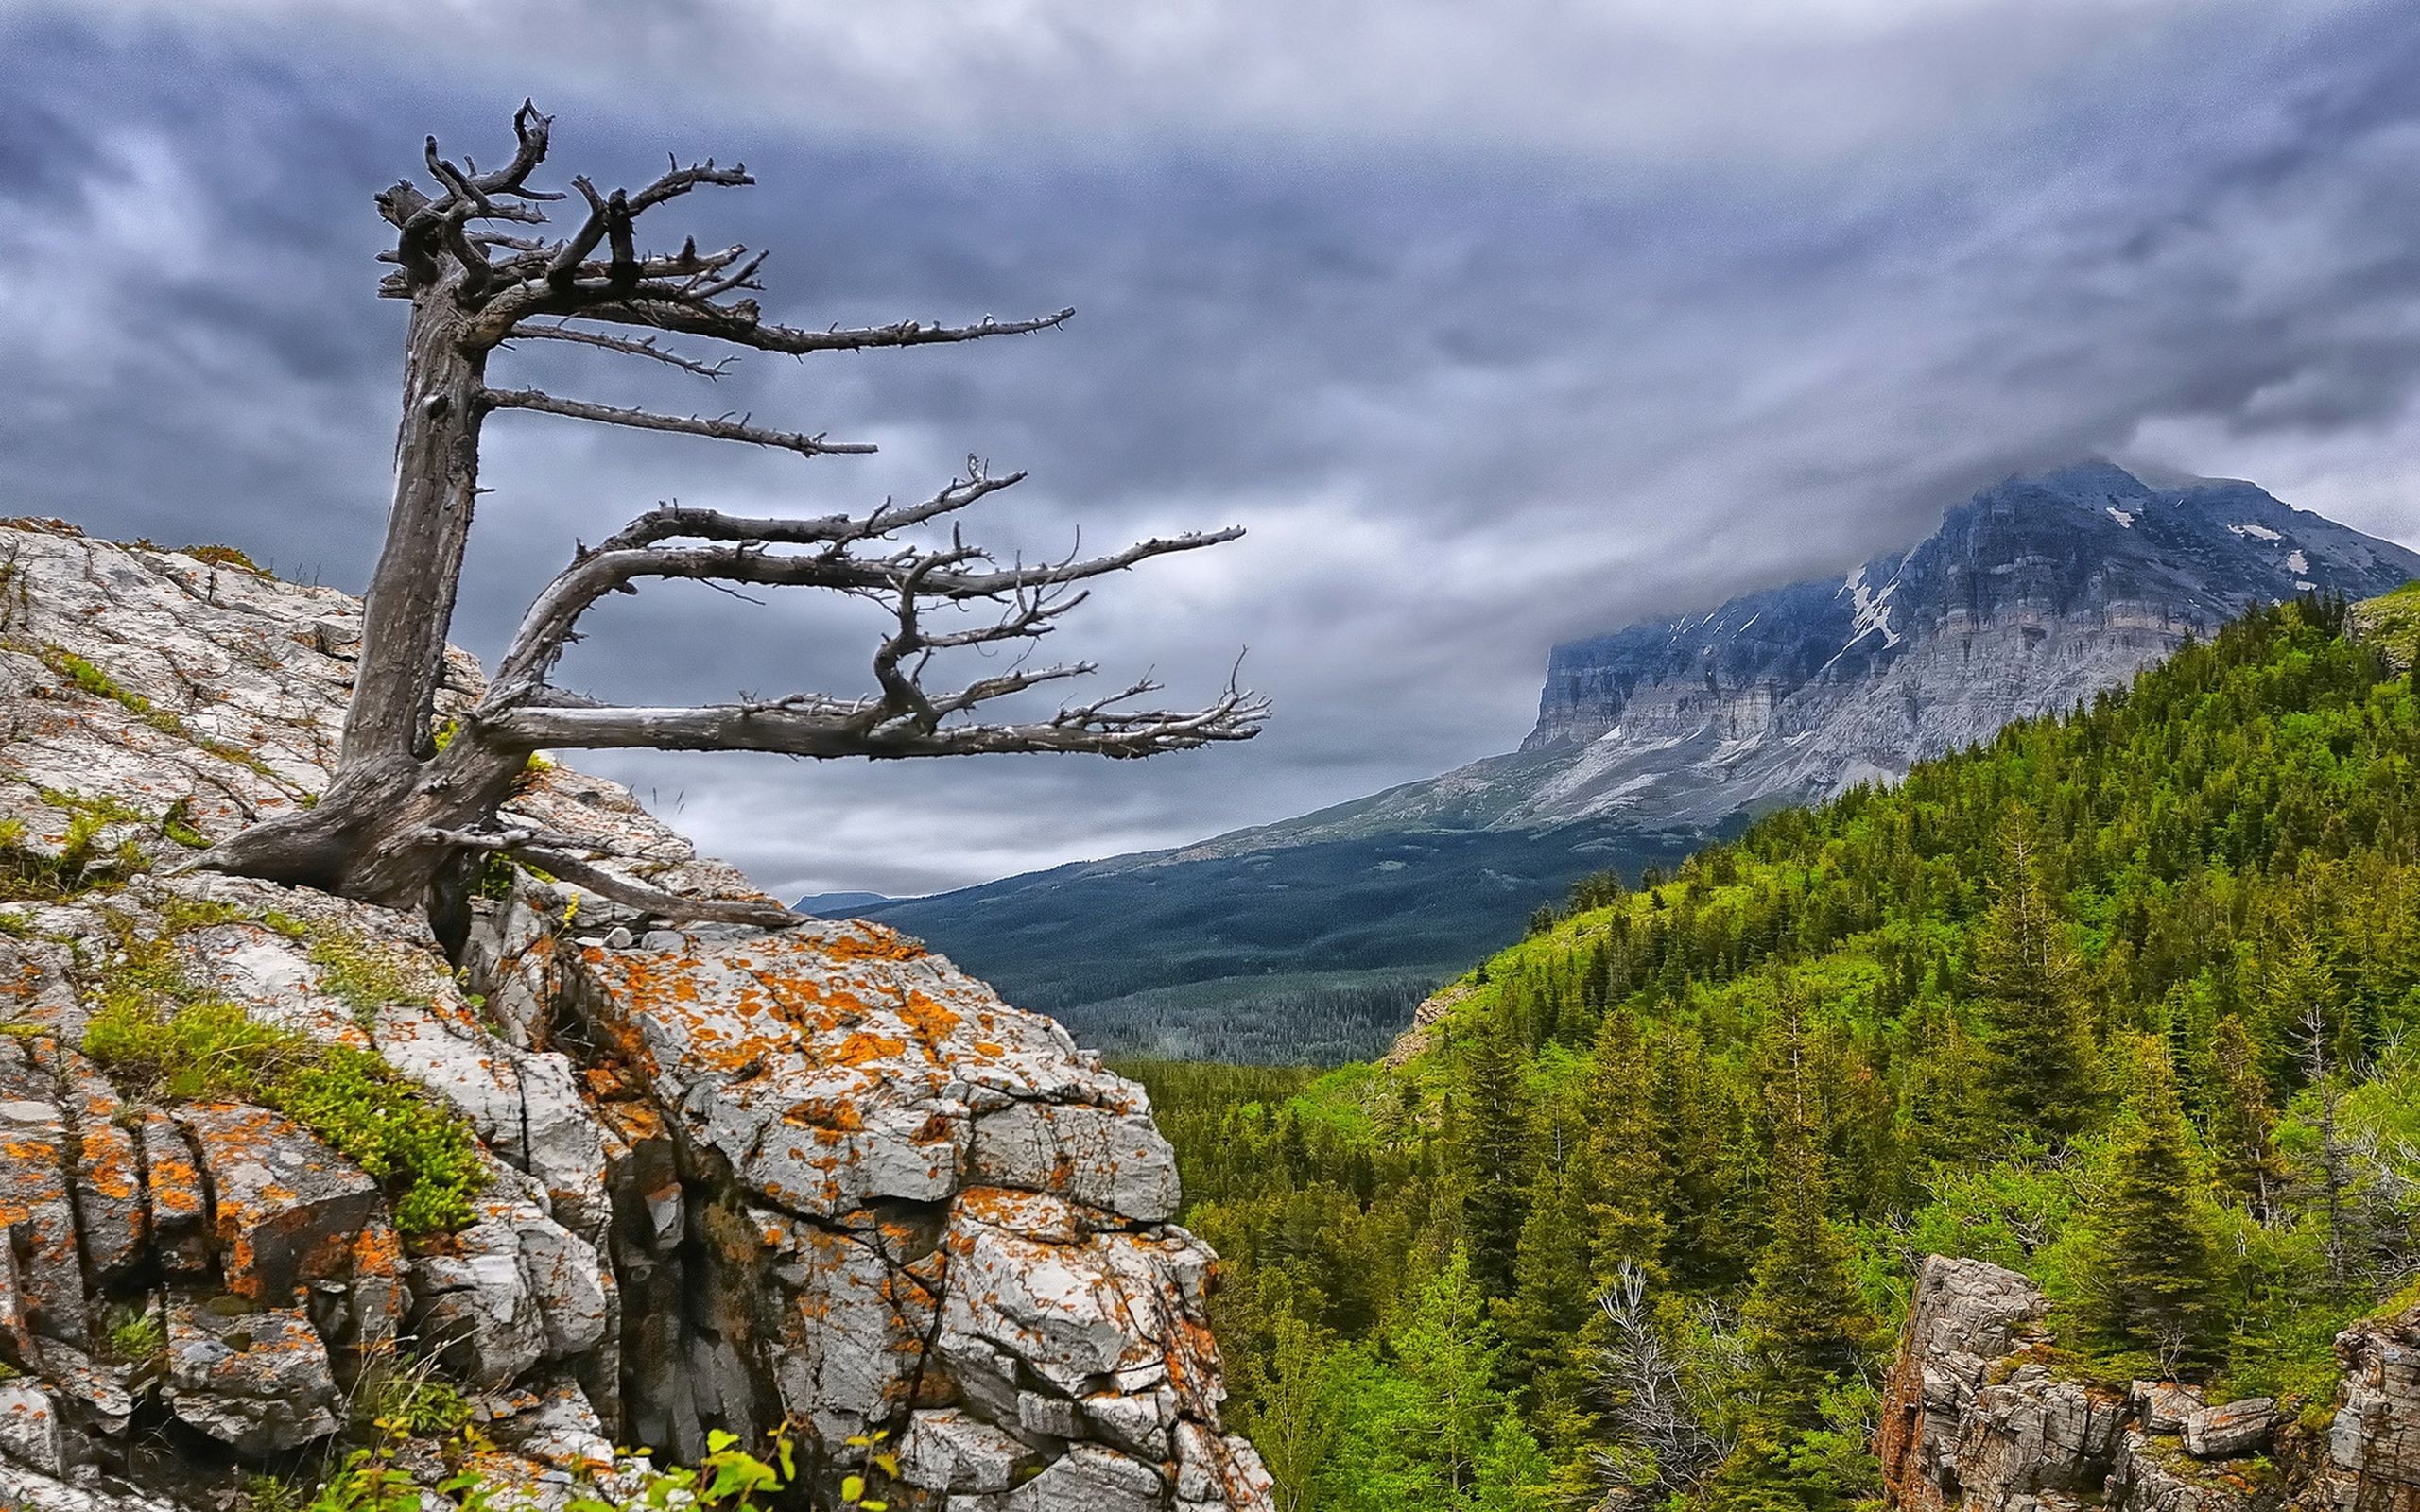 General 2560x1600 cliff forest clouds overcast trees dead trees landscape nature rocks stones mountains Glacier National Park USA Montana Rocky Mountains